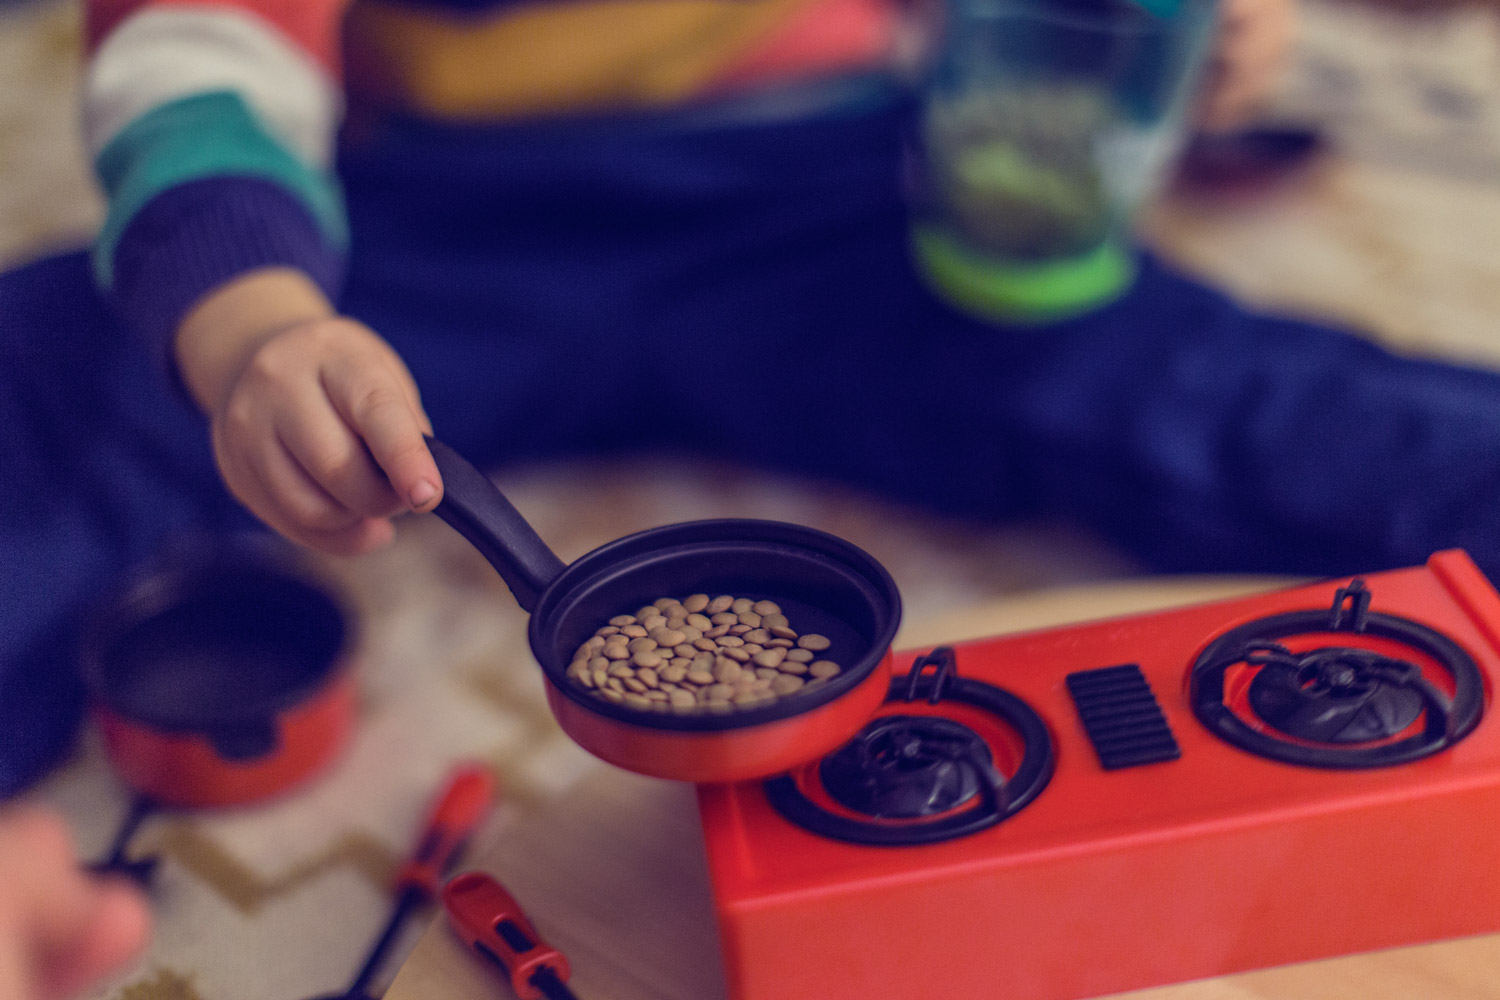 Small child's hand holding a toy pot filled with lentils